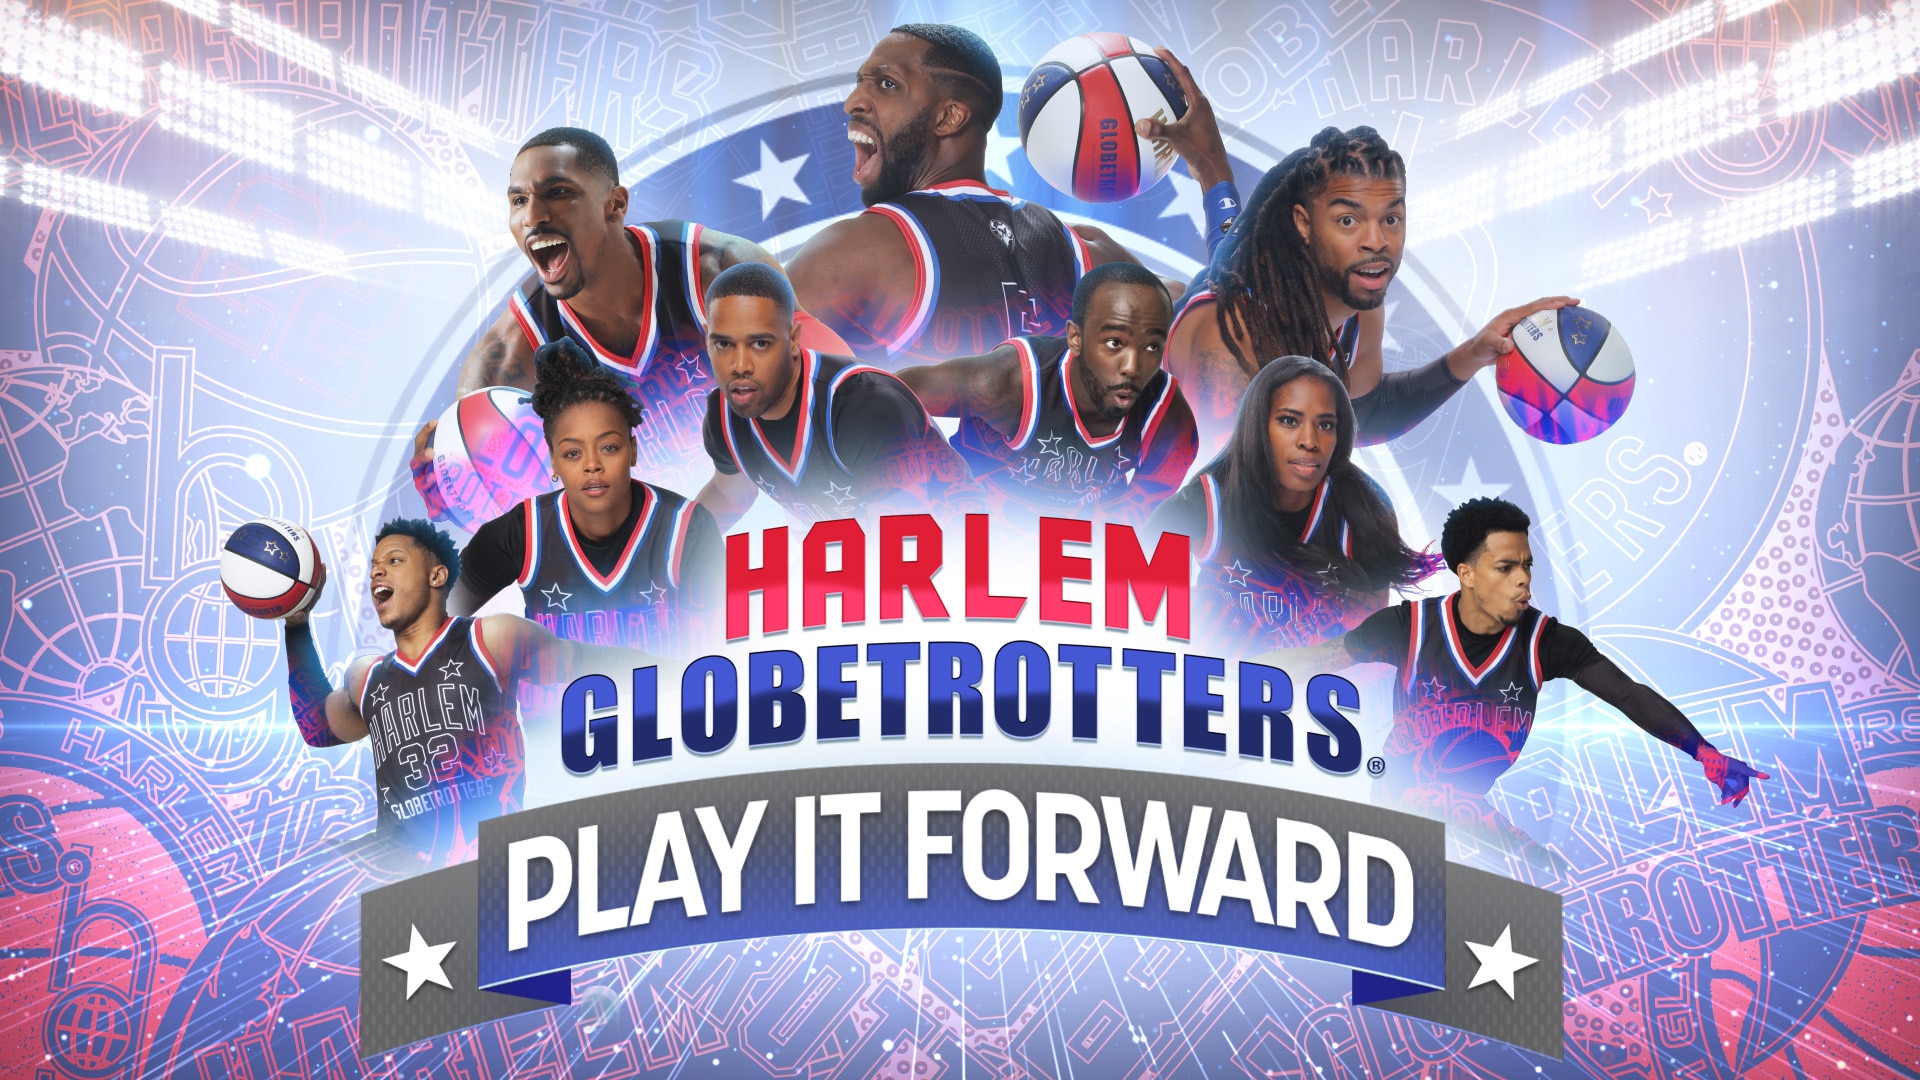 Harlem Globetrotters: Play It Forward on FREECABLE TV